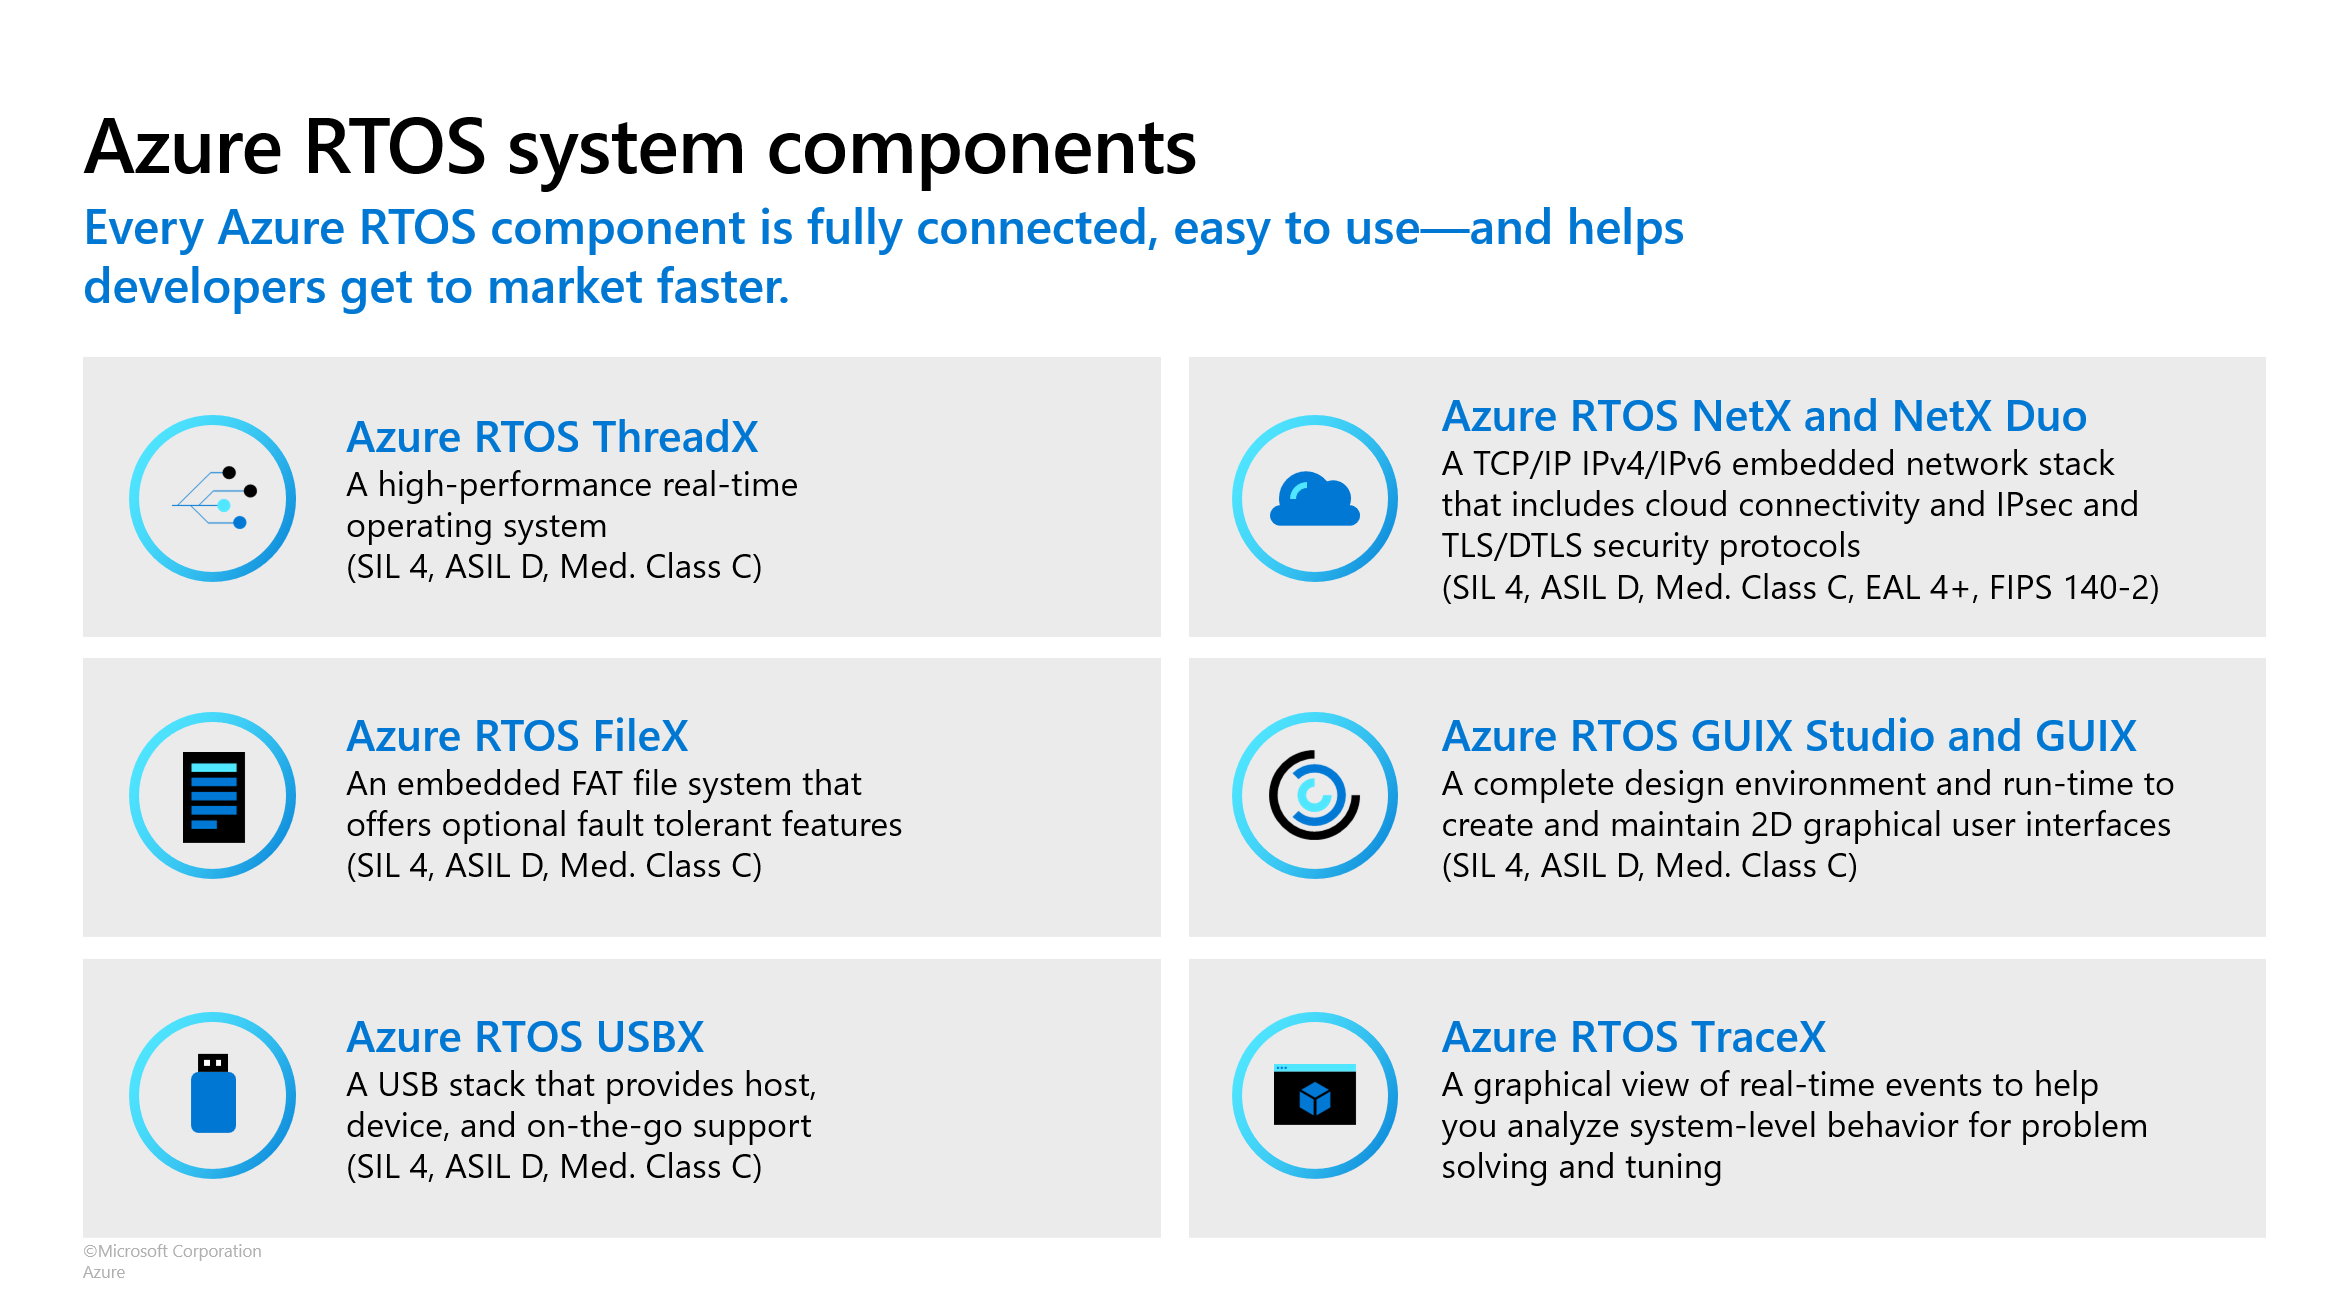 The diagram of Azure RTOS system components.